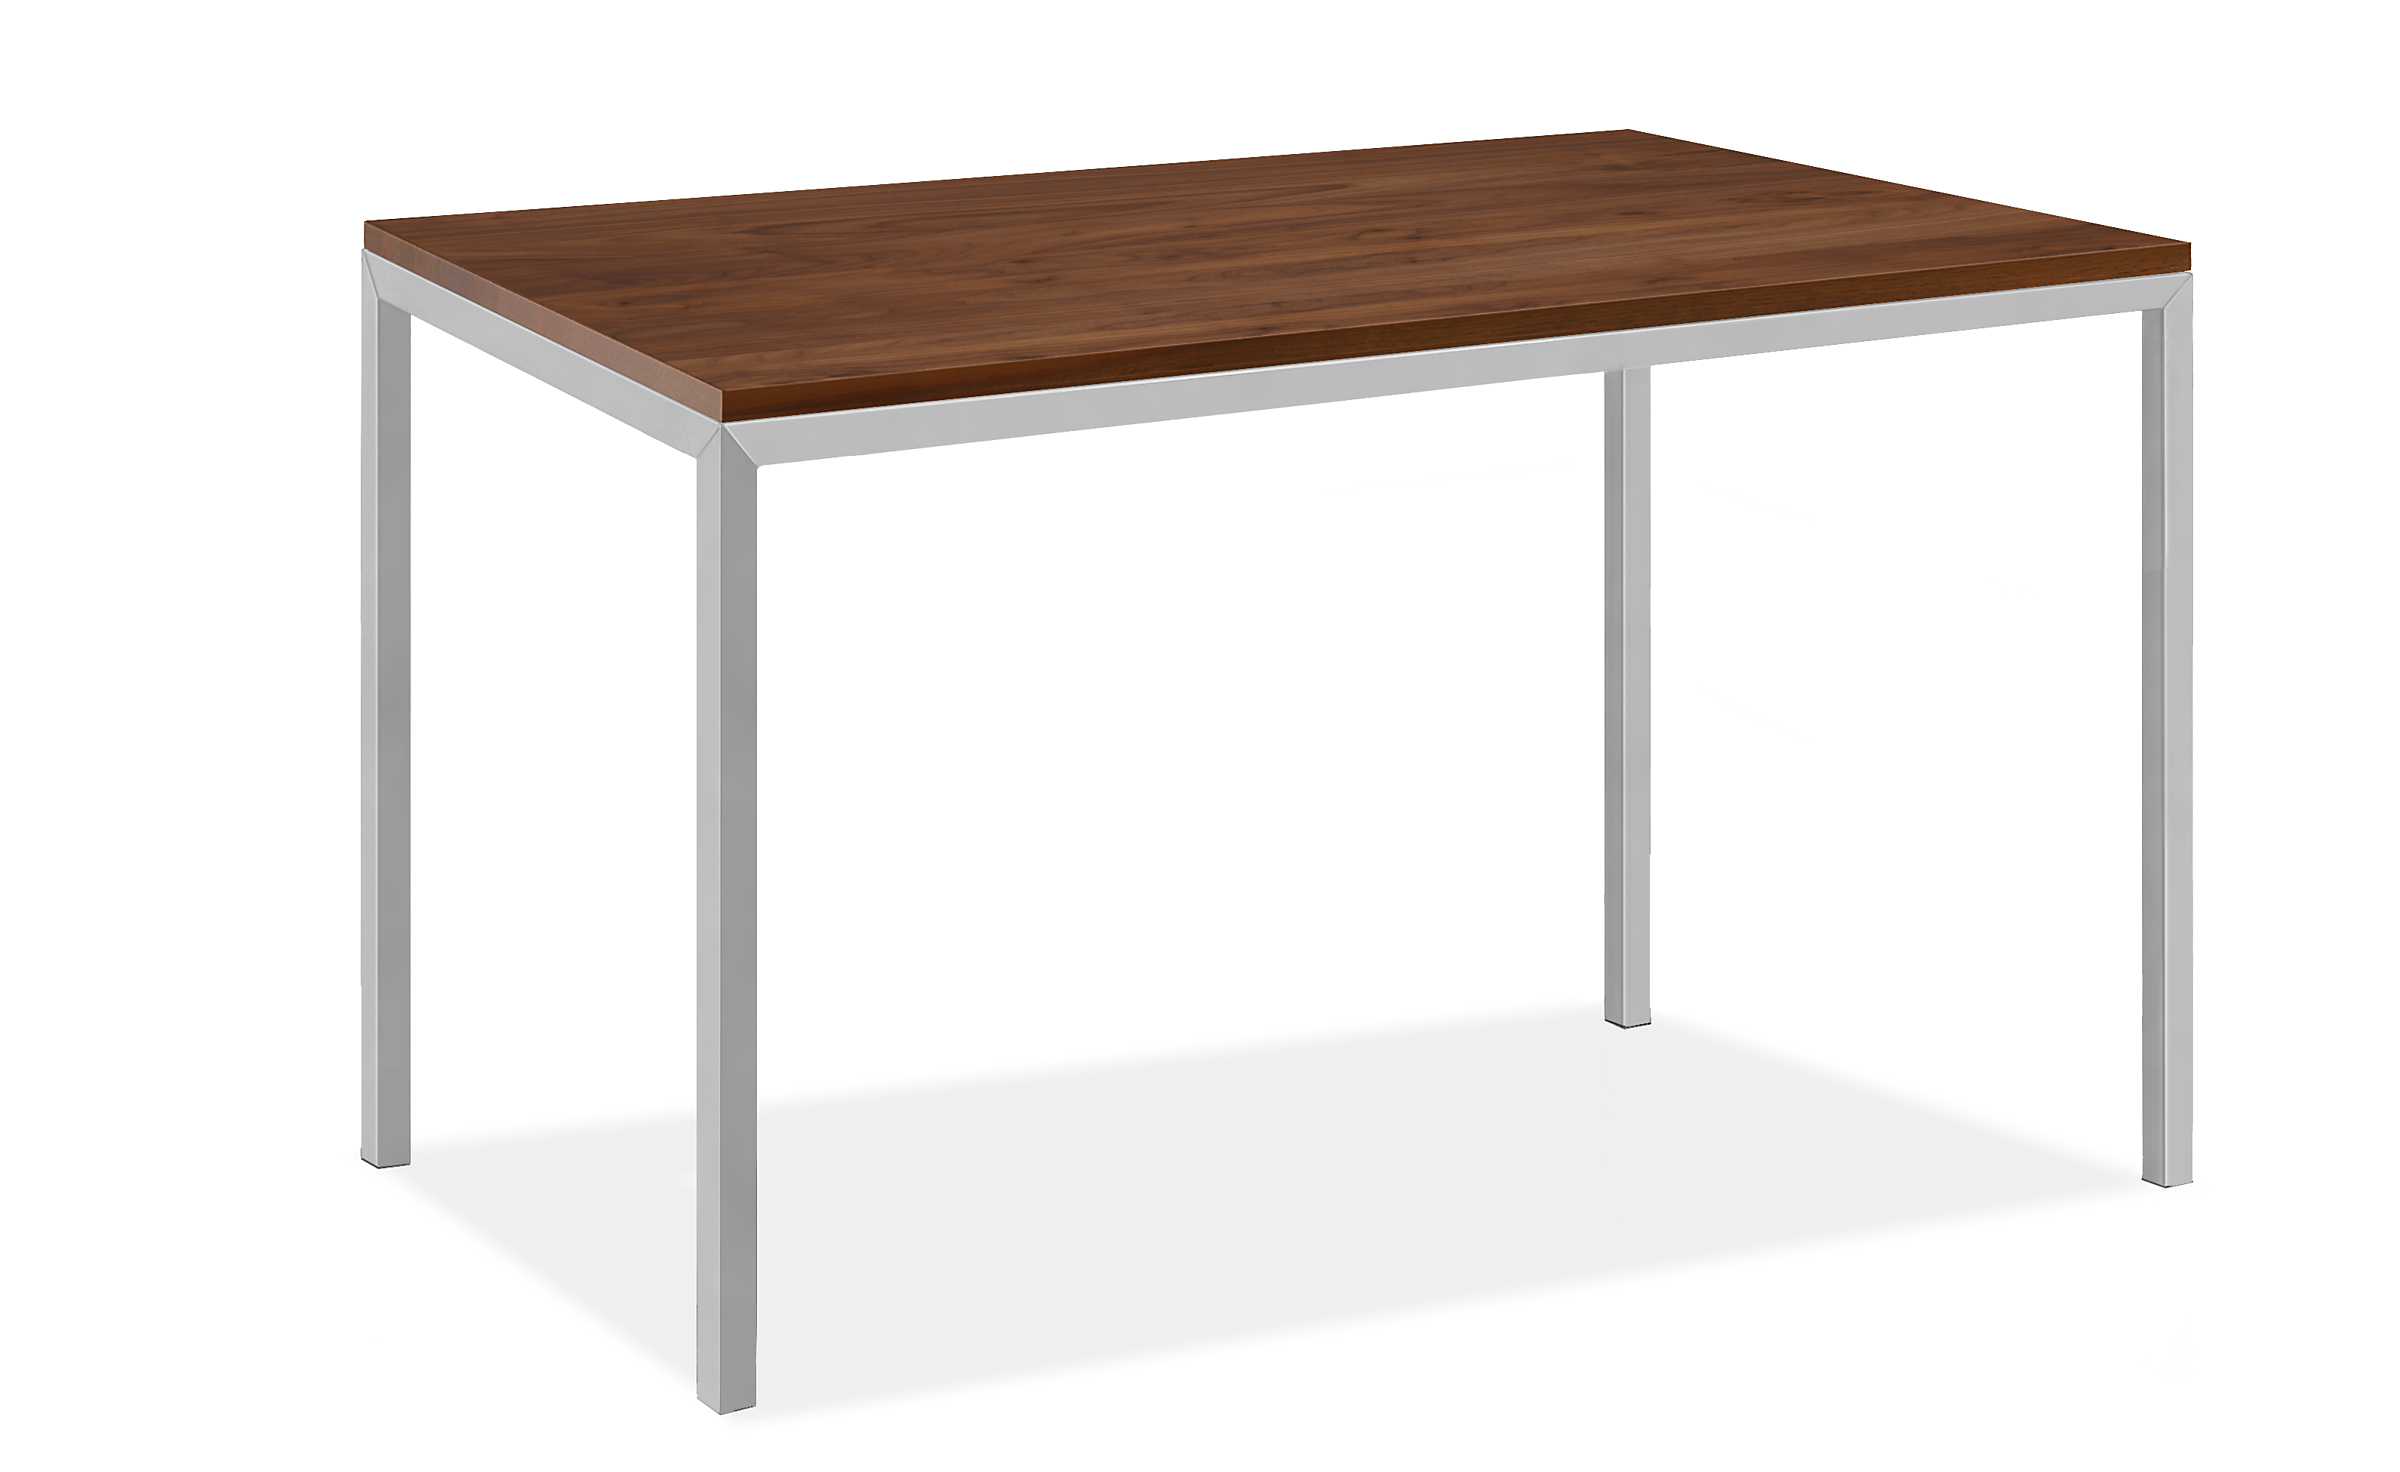 Parsons 60w 30d 35h Counter Table with 1.5" Leg